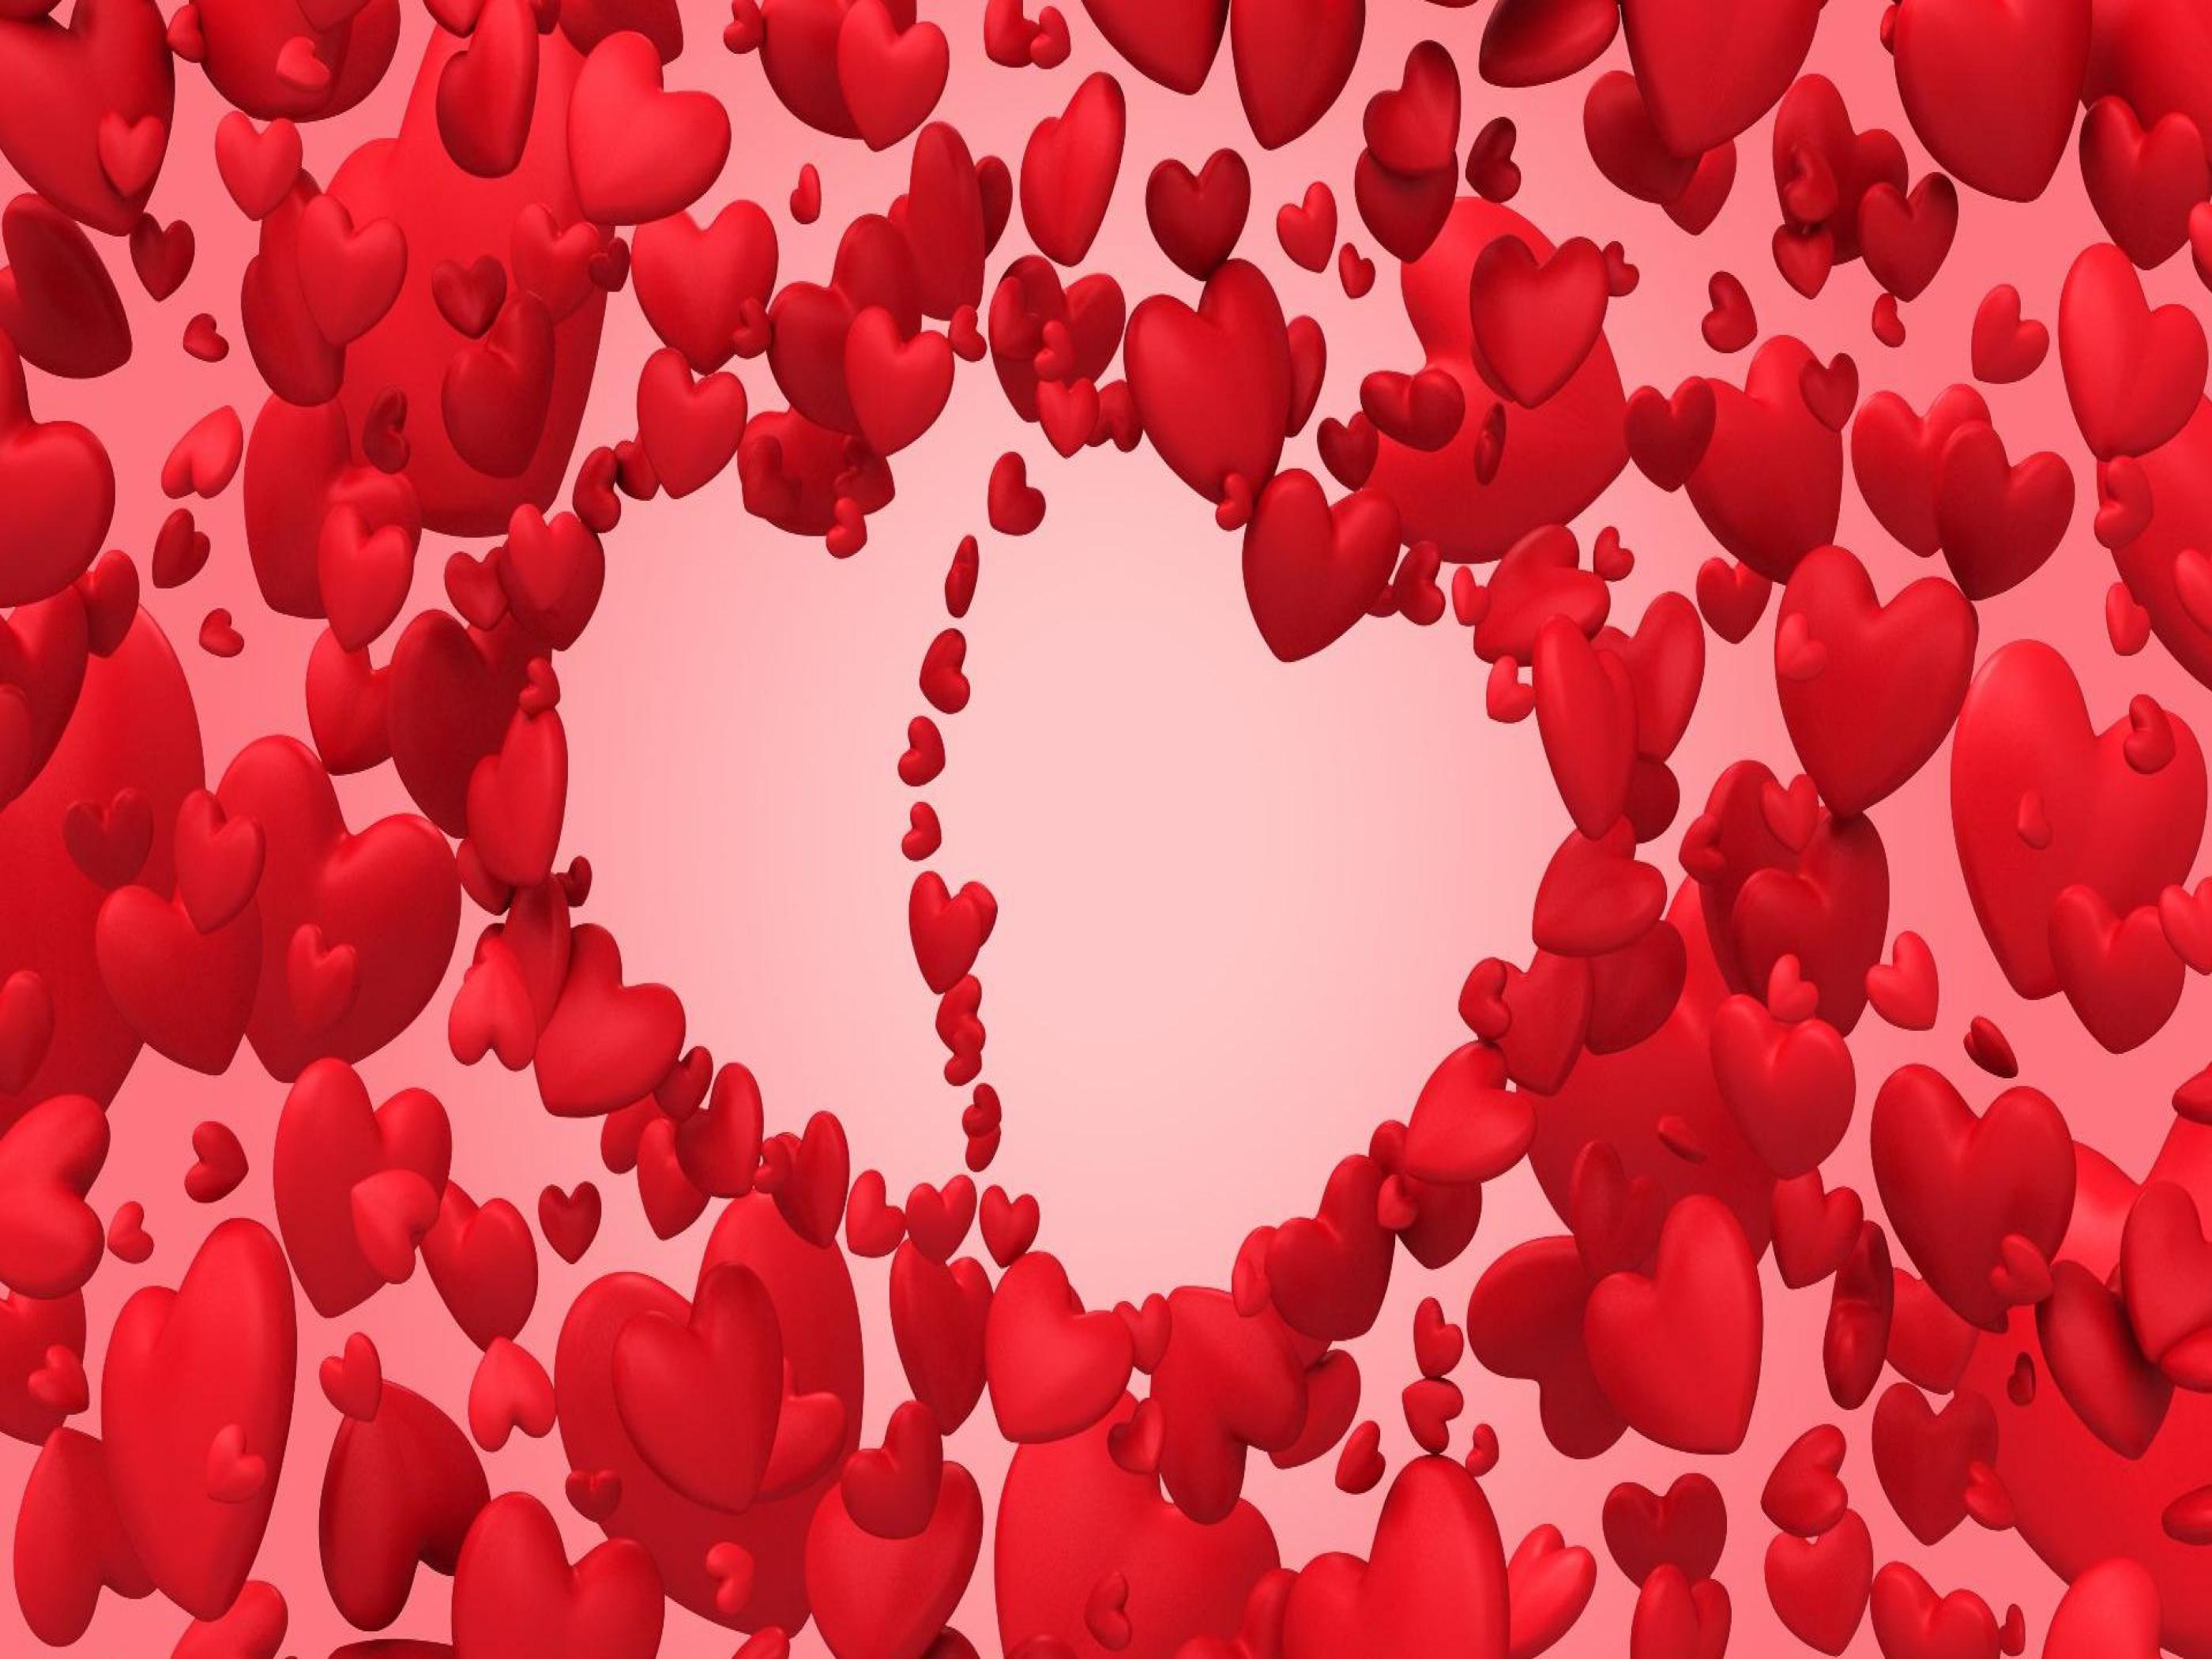 Hearts Backgrounds HD Free download 